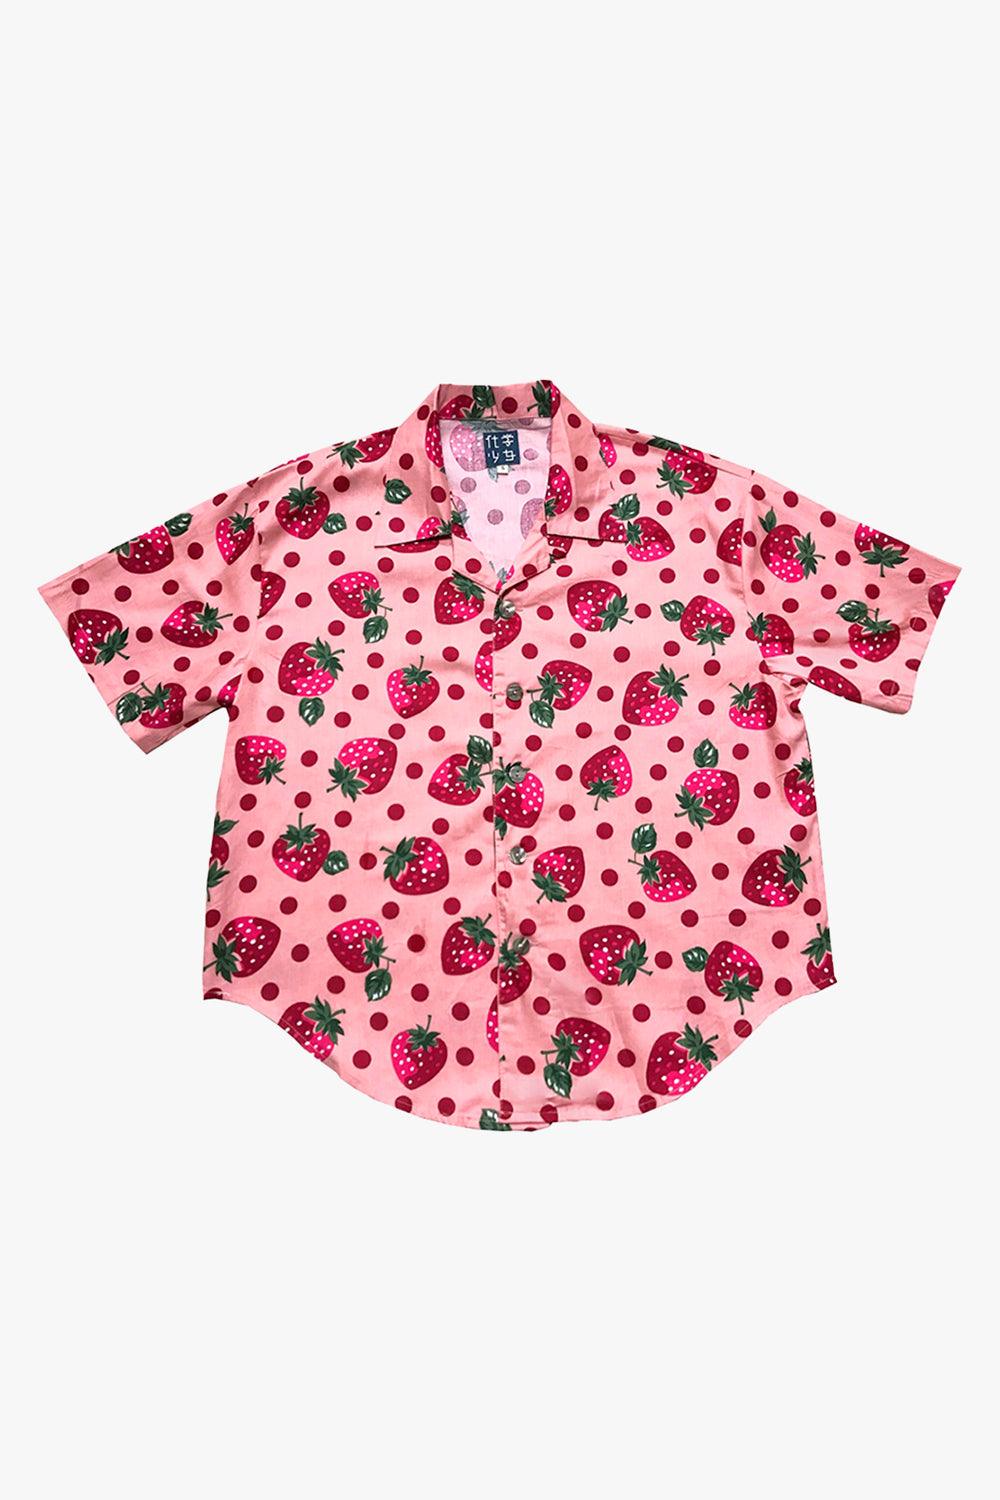 Cute Pink Strawberry Shirt - Aesthetic Clothes Shop